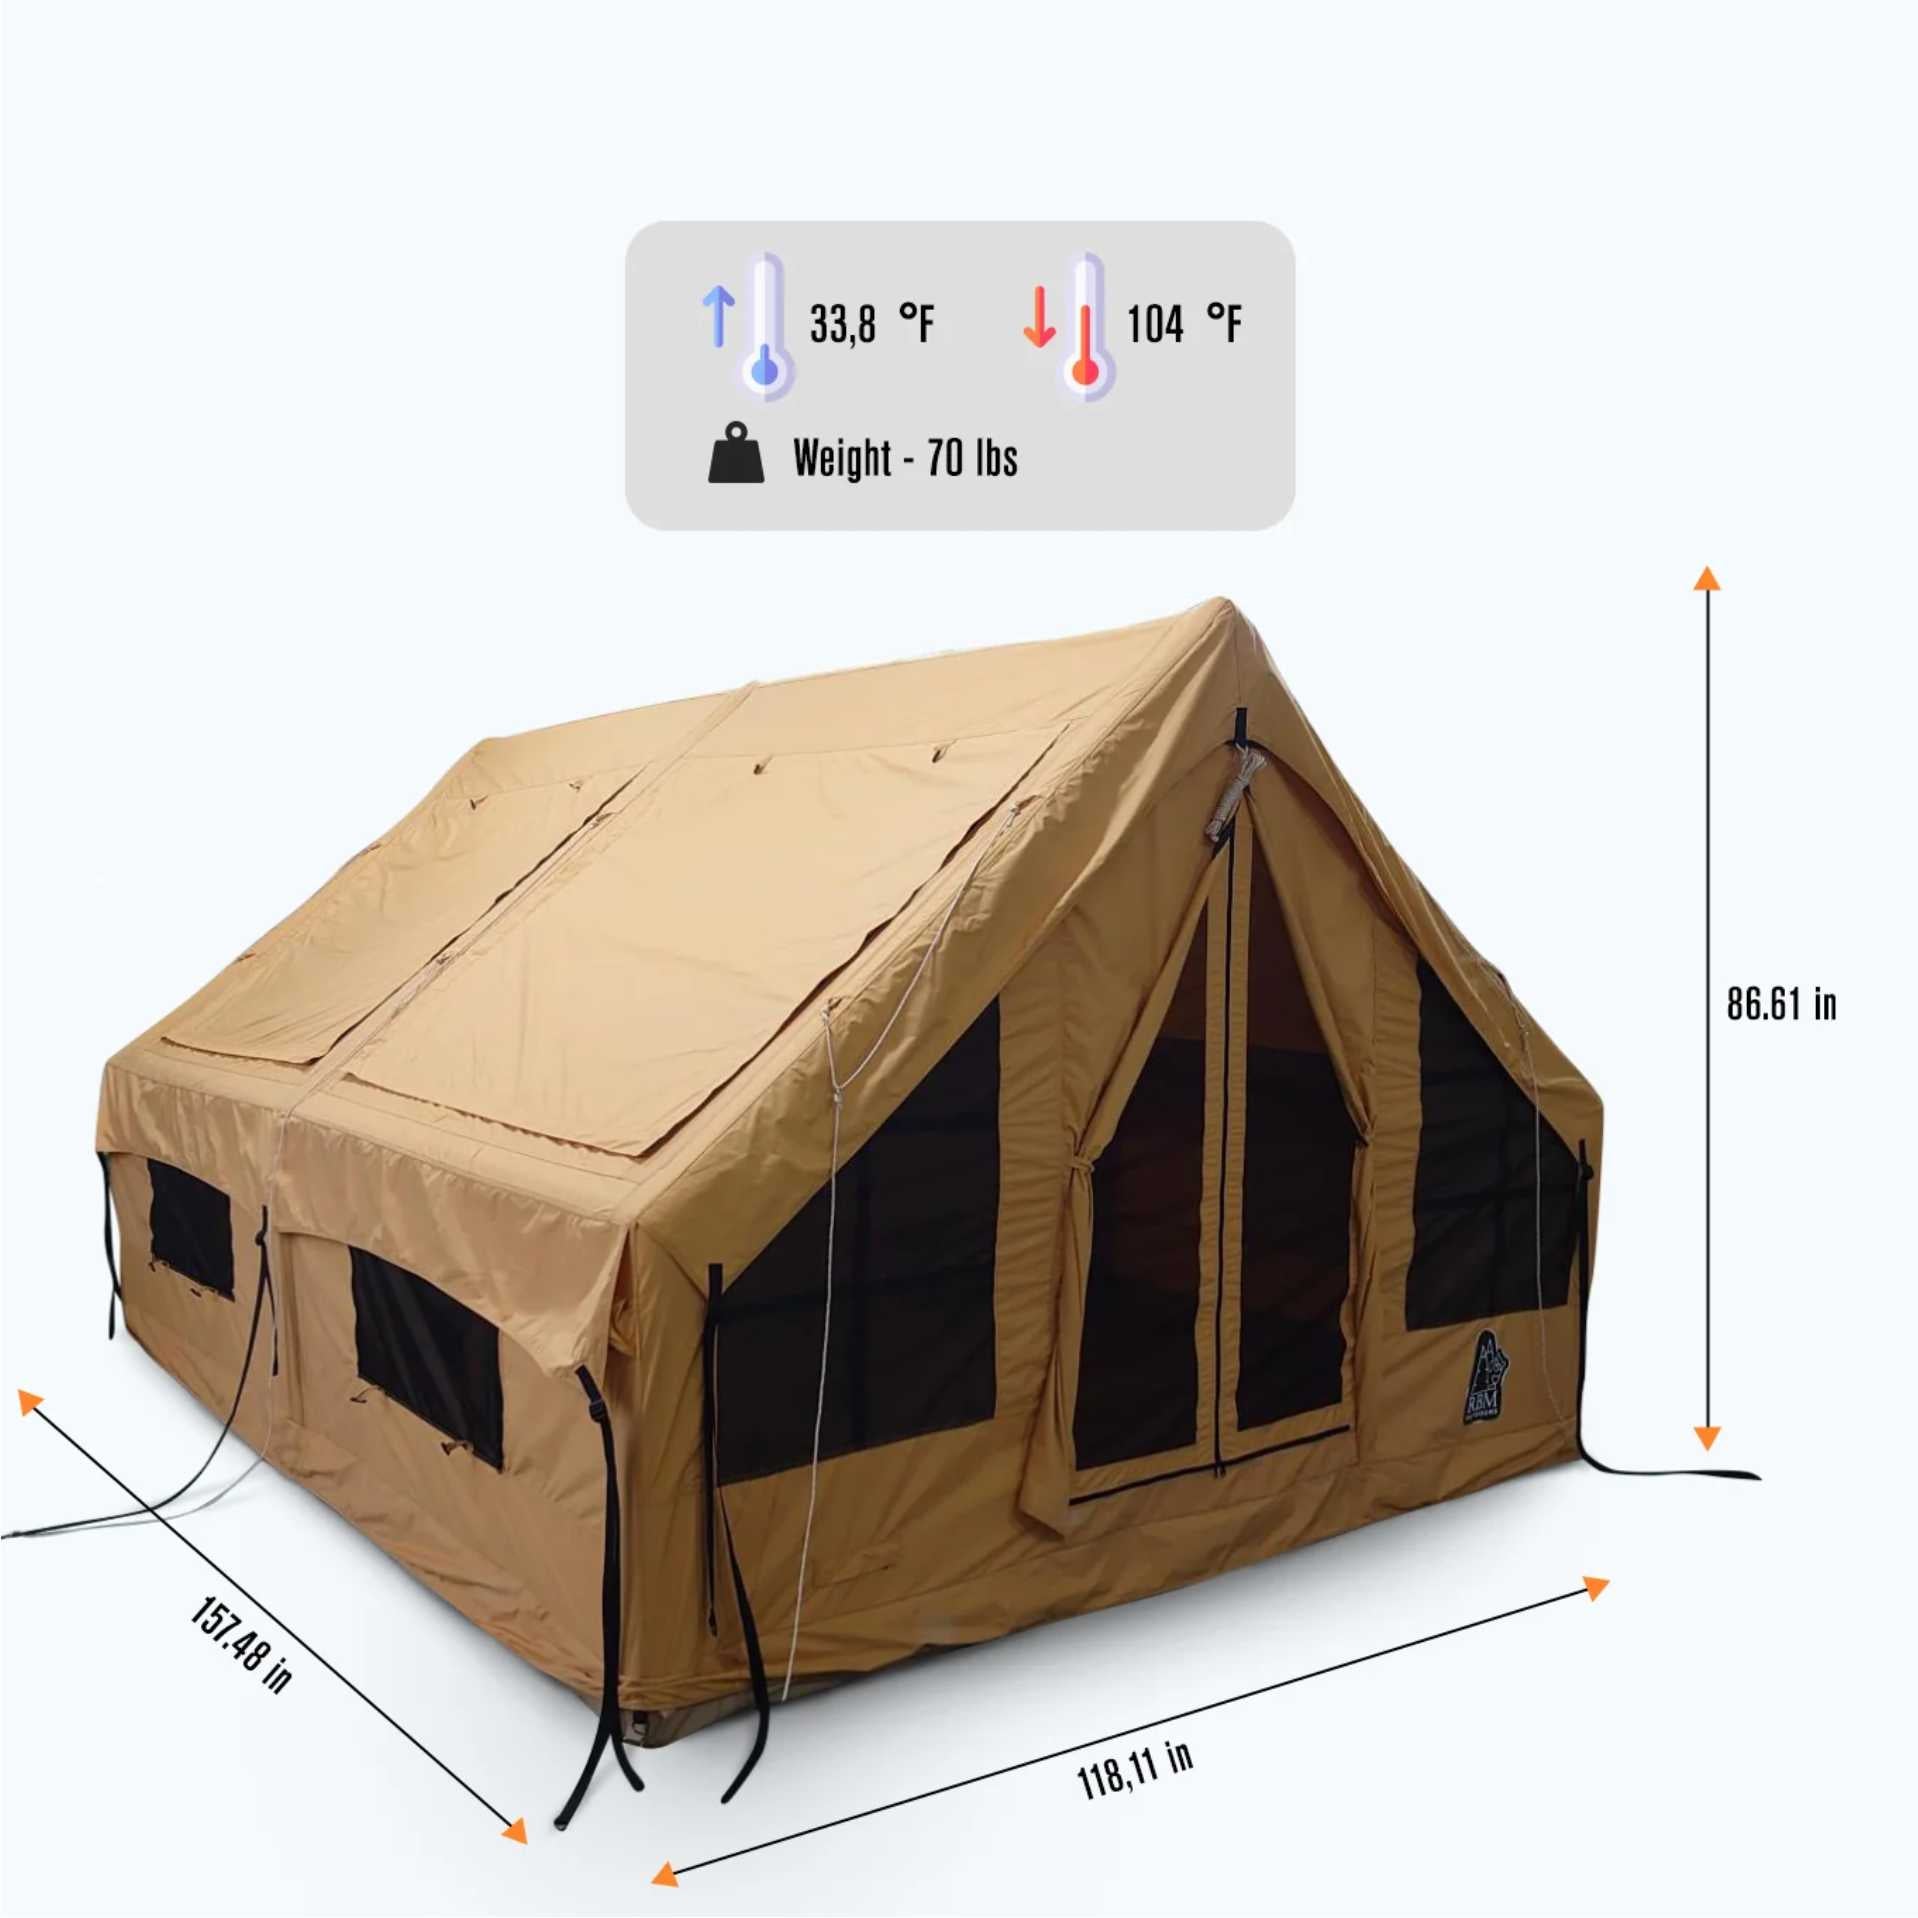 Inflatable Tents - Air Tents